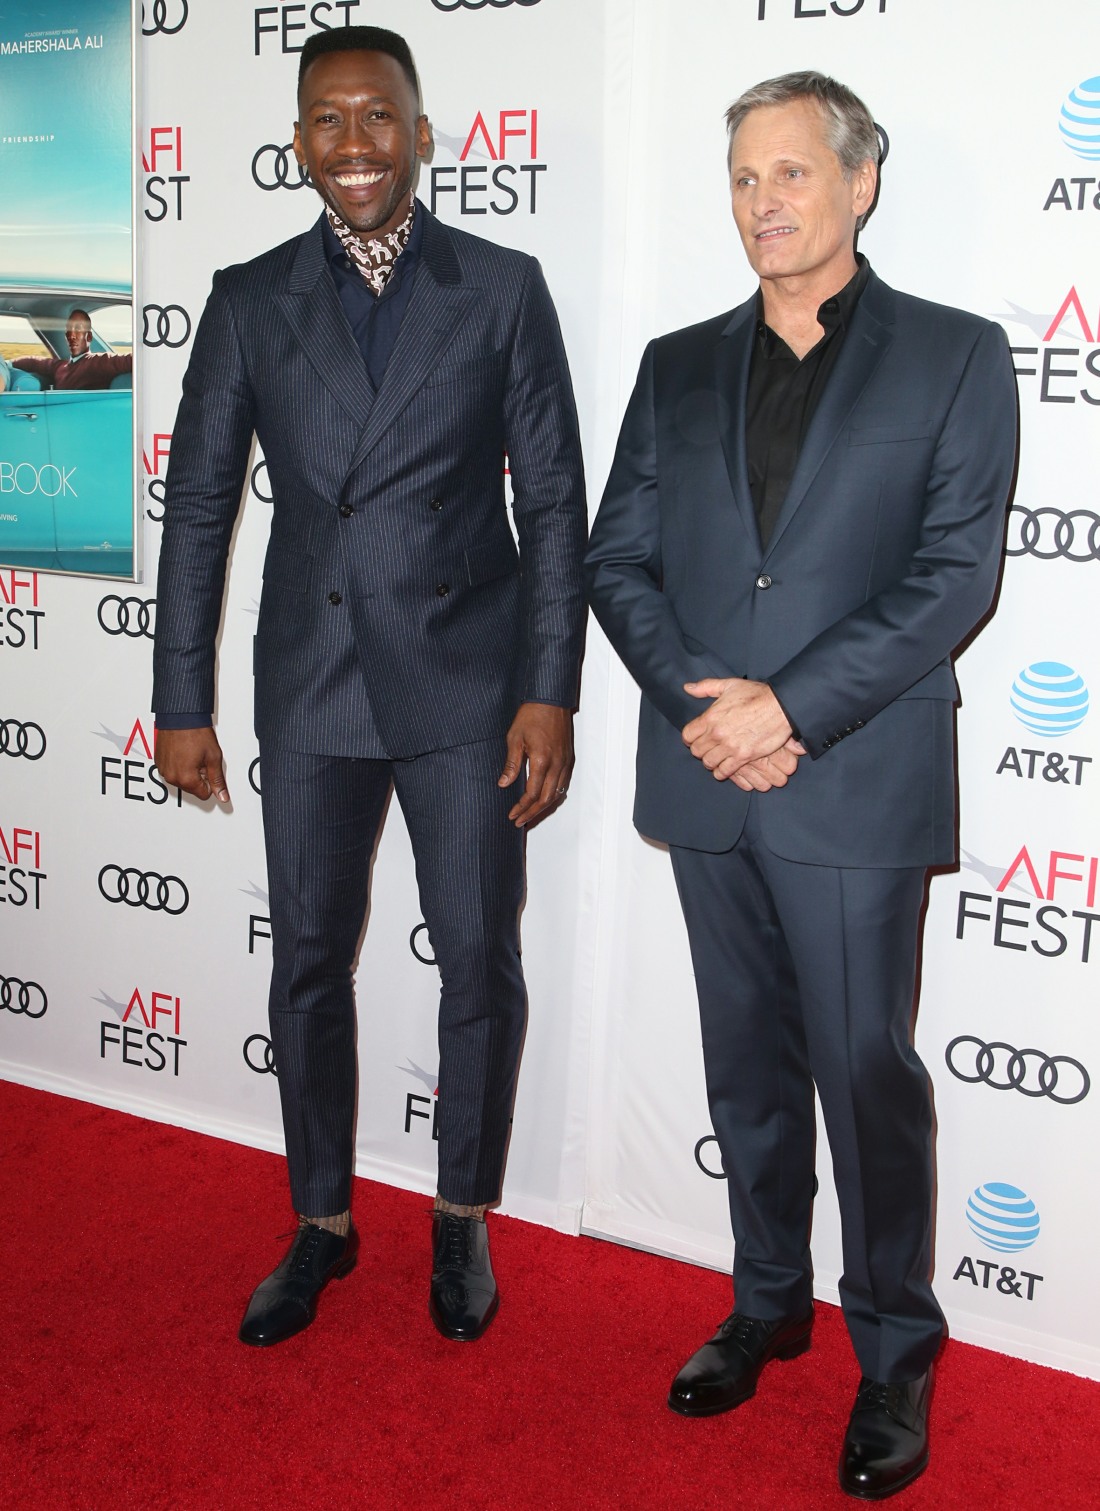 AFI Fest 2018 Presented by Audi - Gala Screening of 'Green Book' - Arrivals